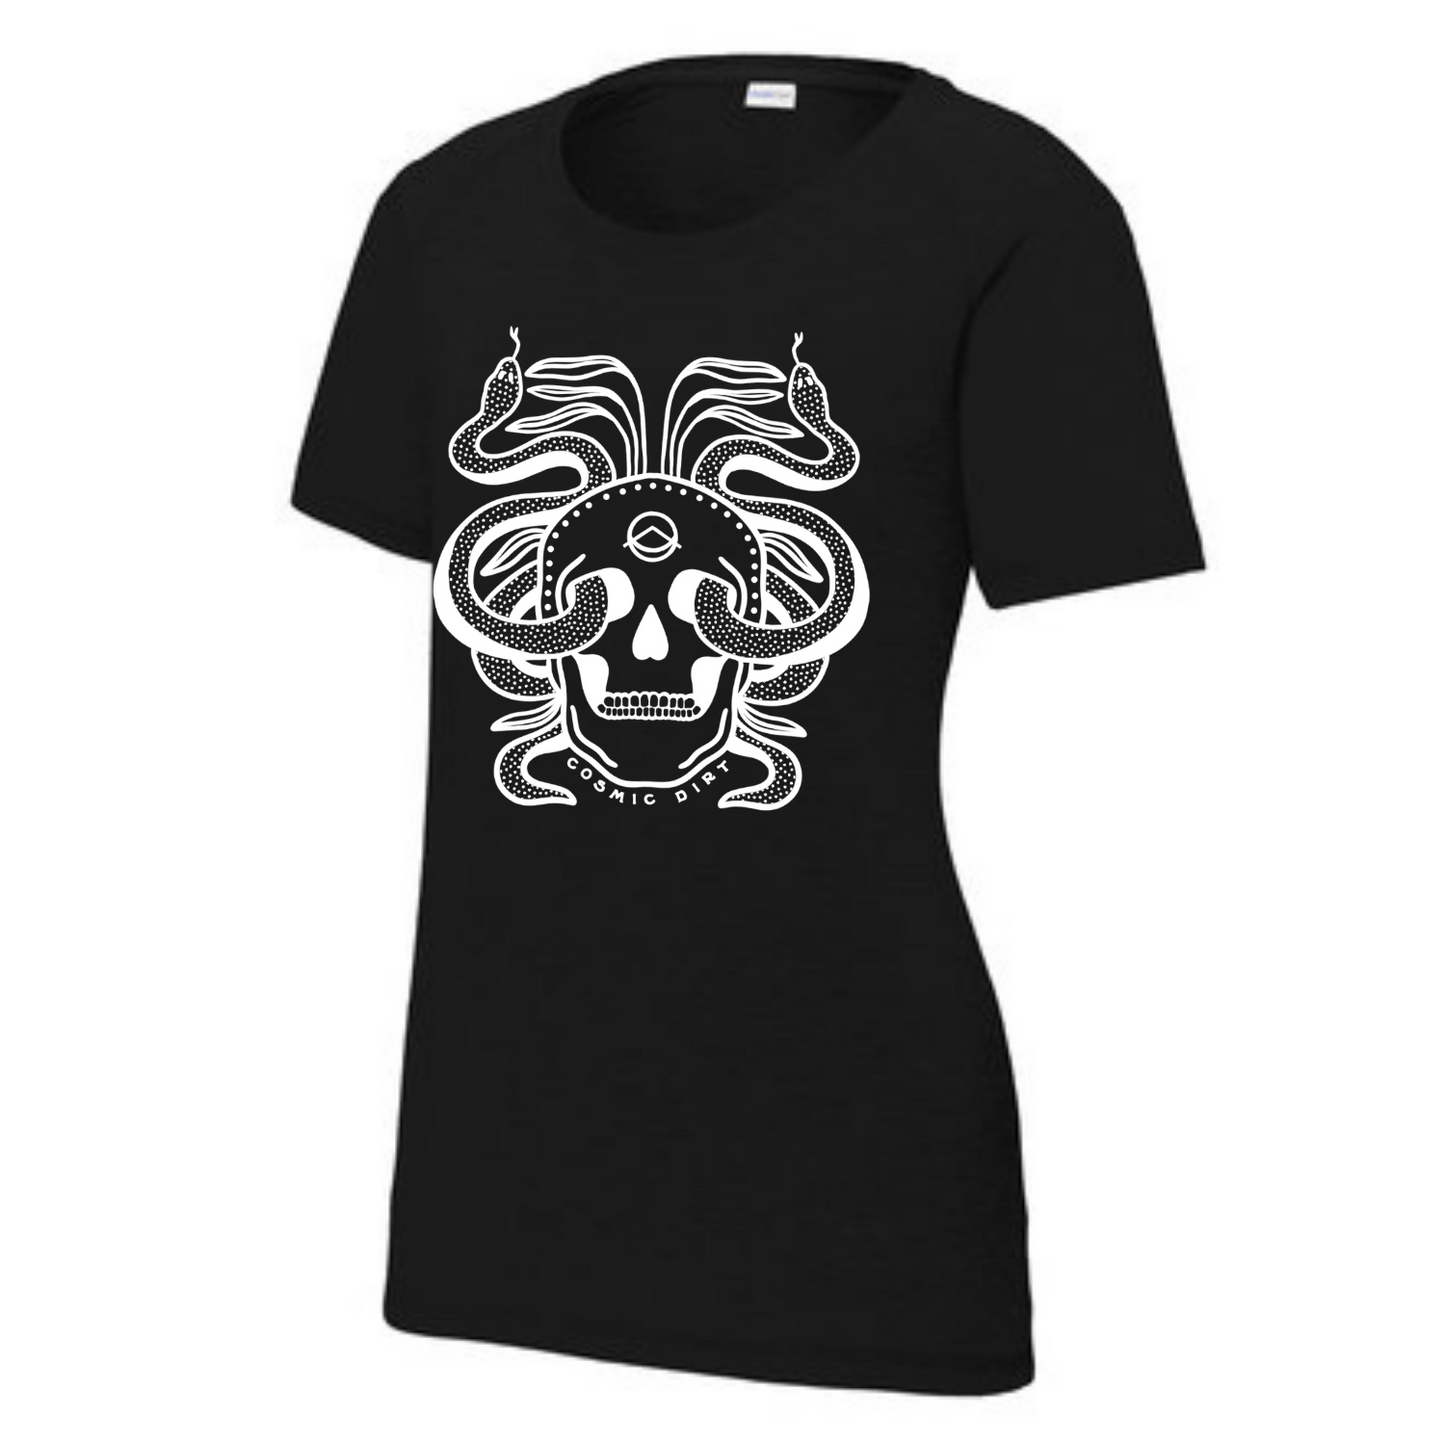 Snake Eyes Short Sleeve Tech Tee - Fitted